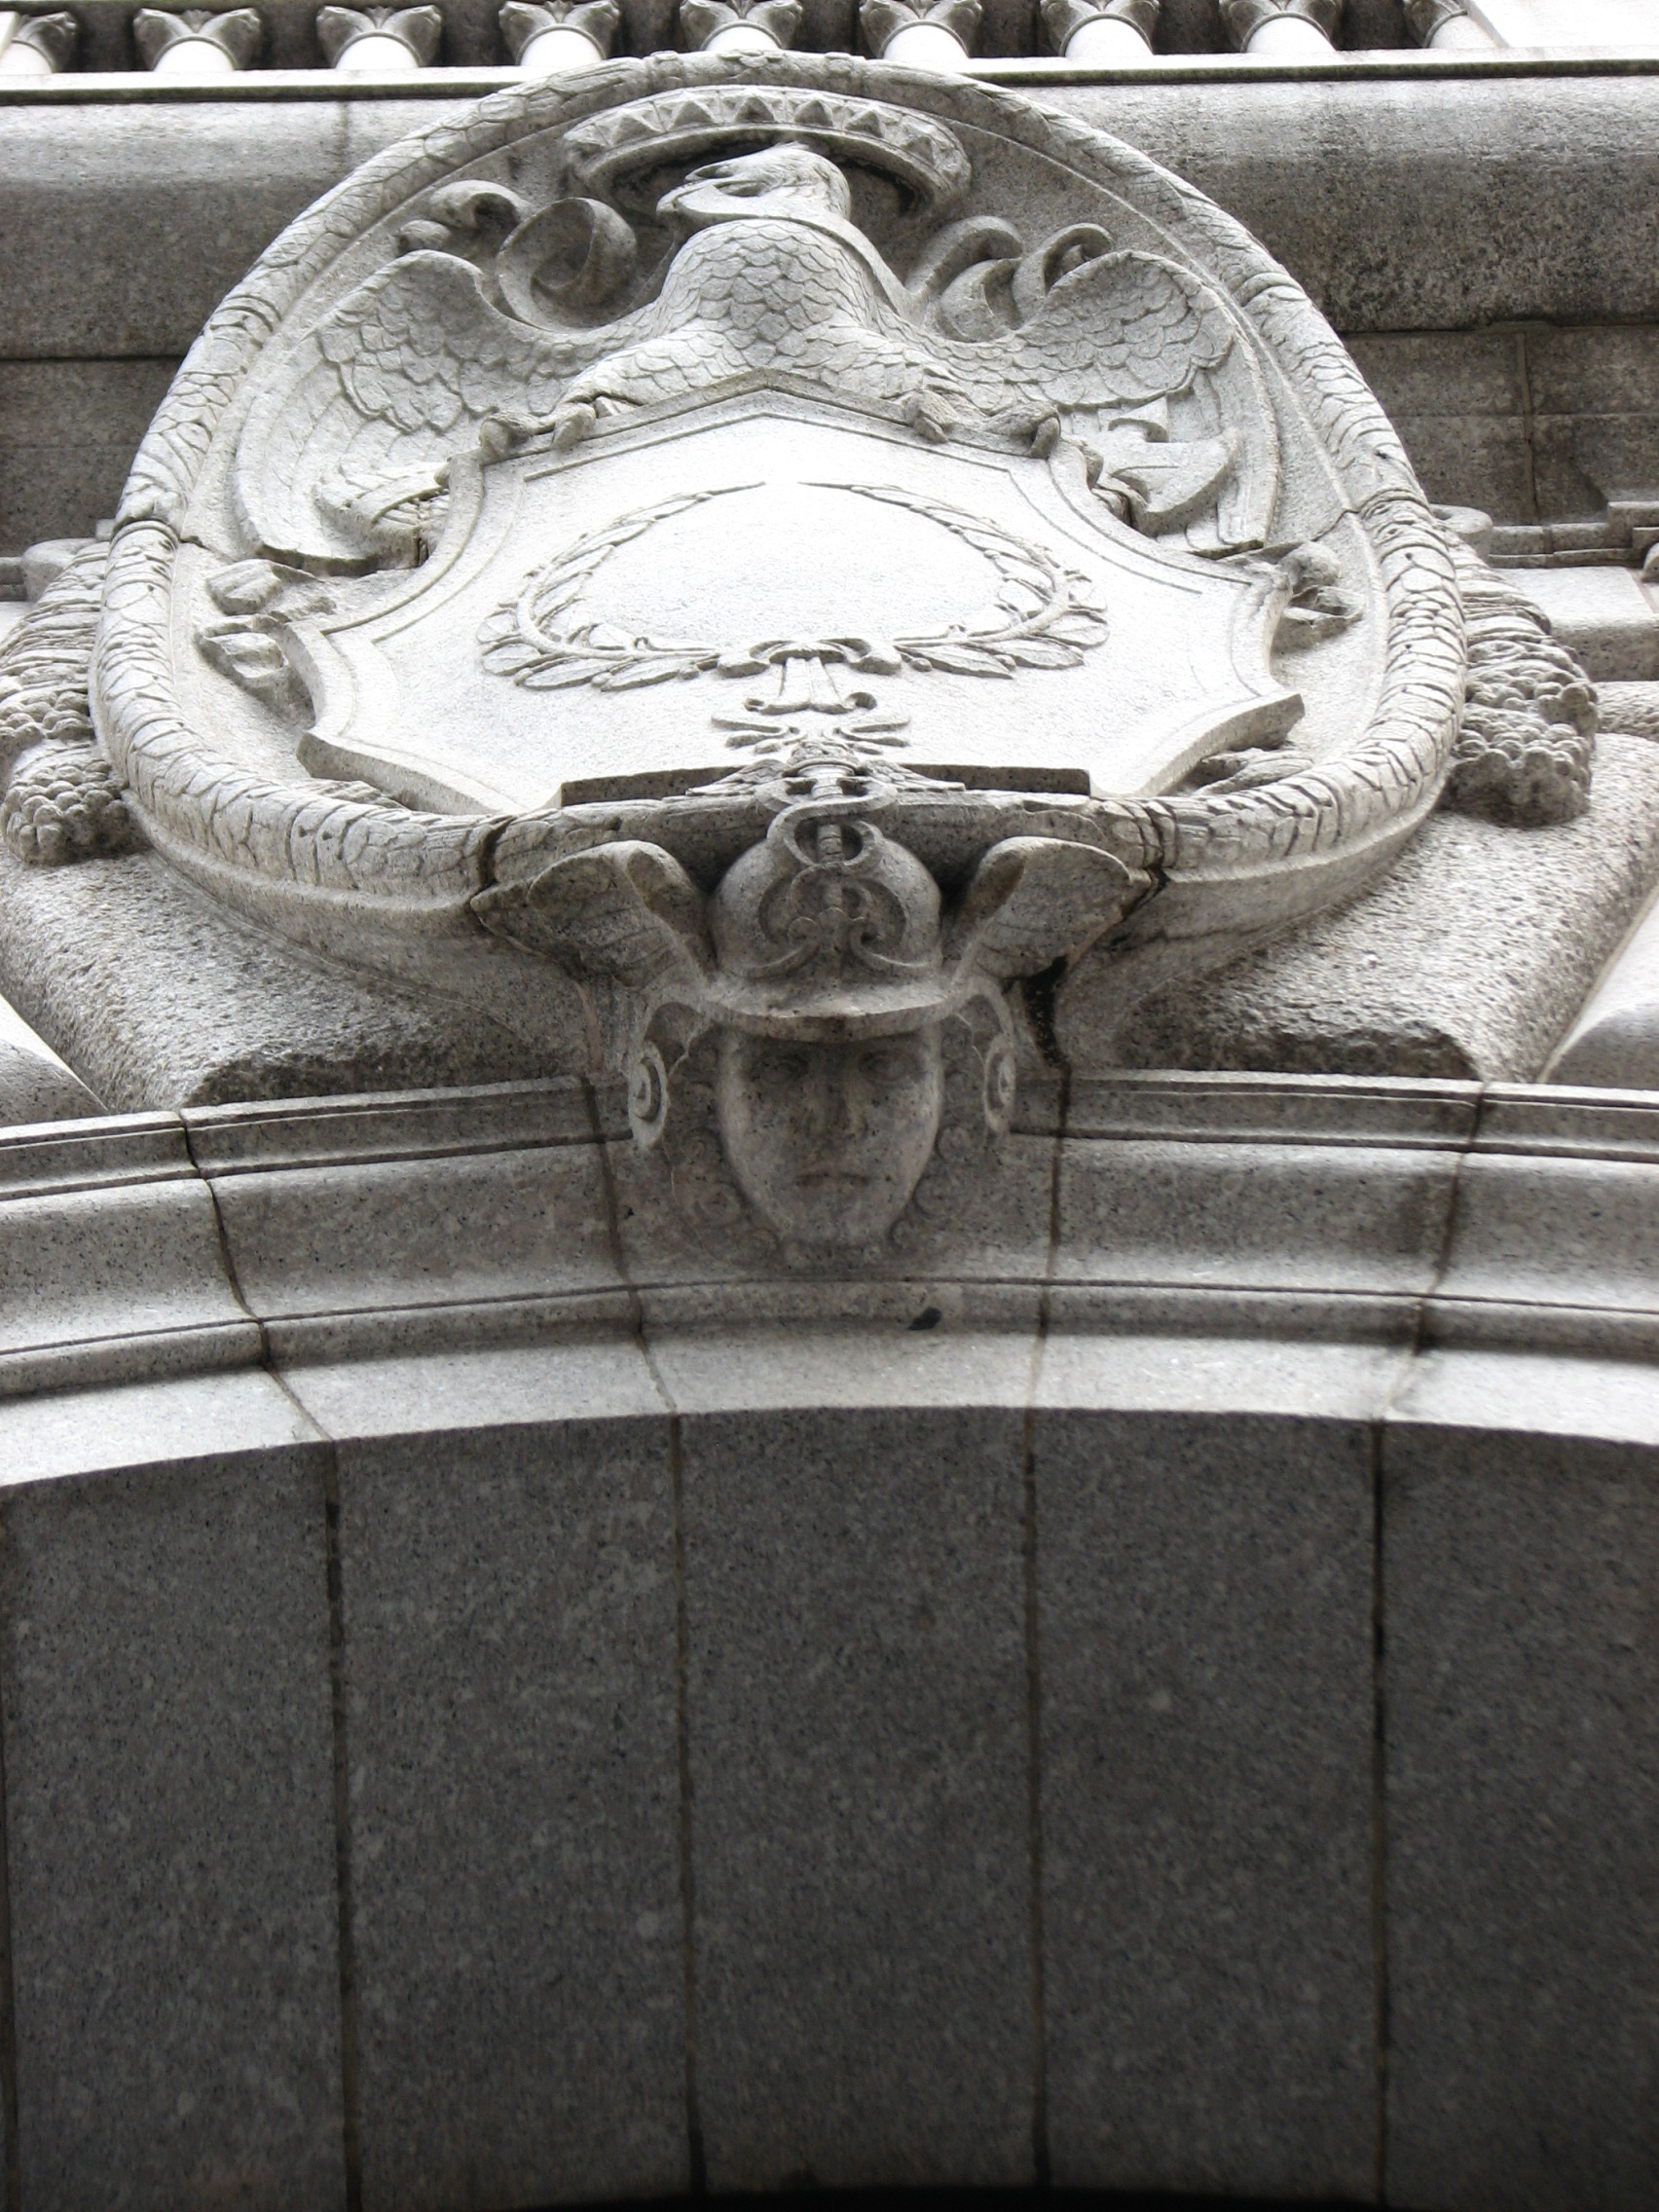 Look up as you enter the building to appreciate the details and depth of the Drexel building shield.